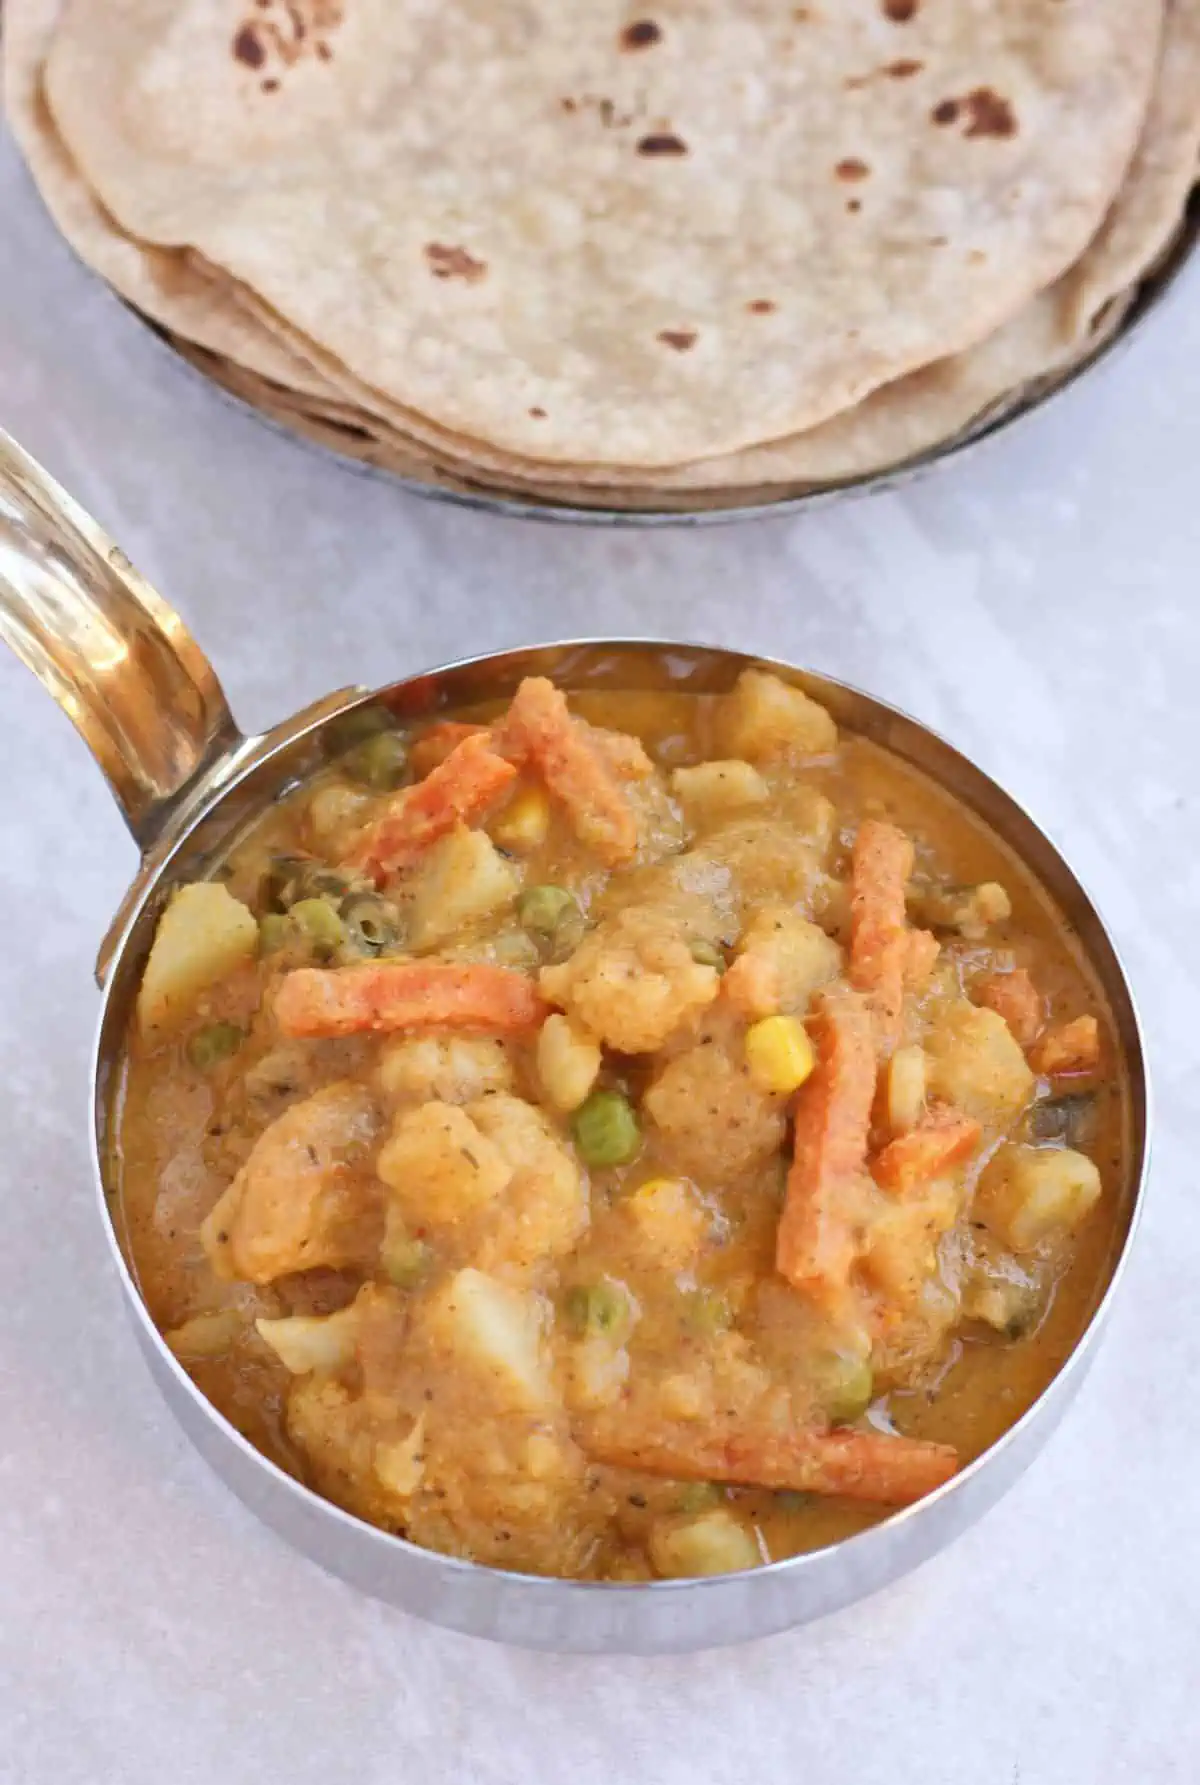 Vegetable curry in a bowl with roti in the background.